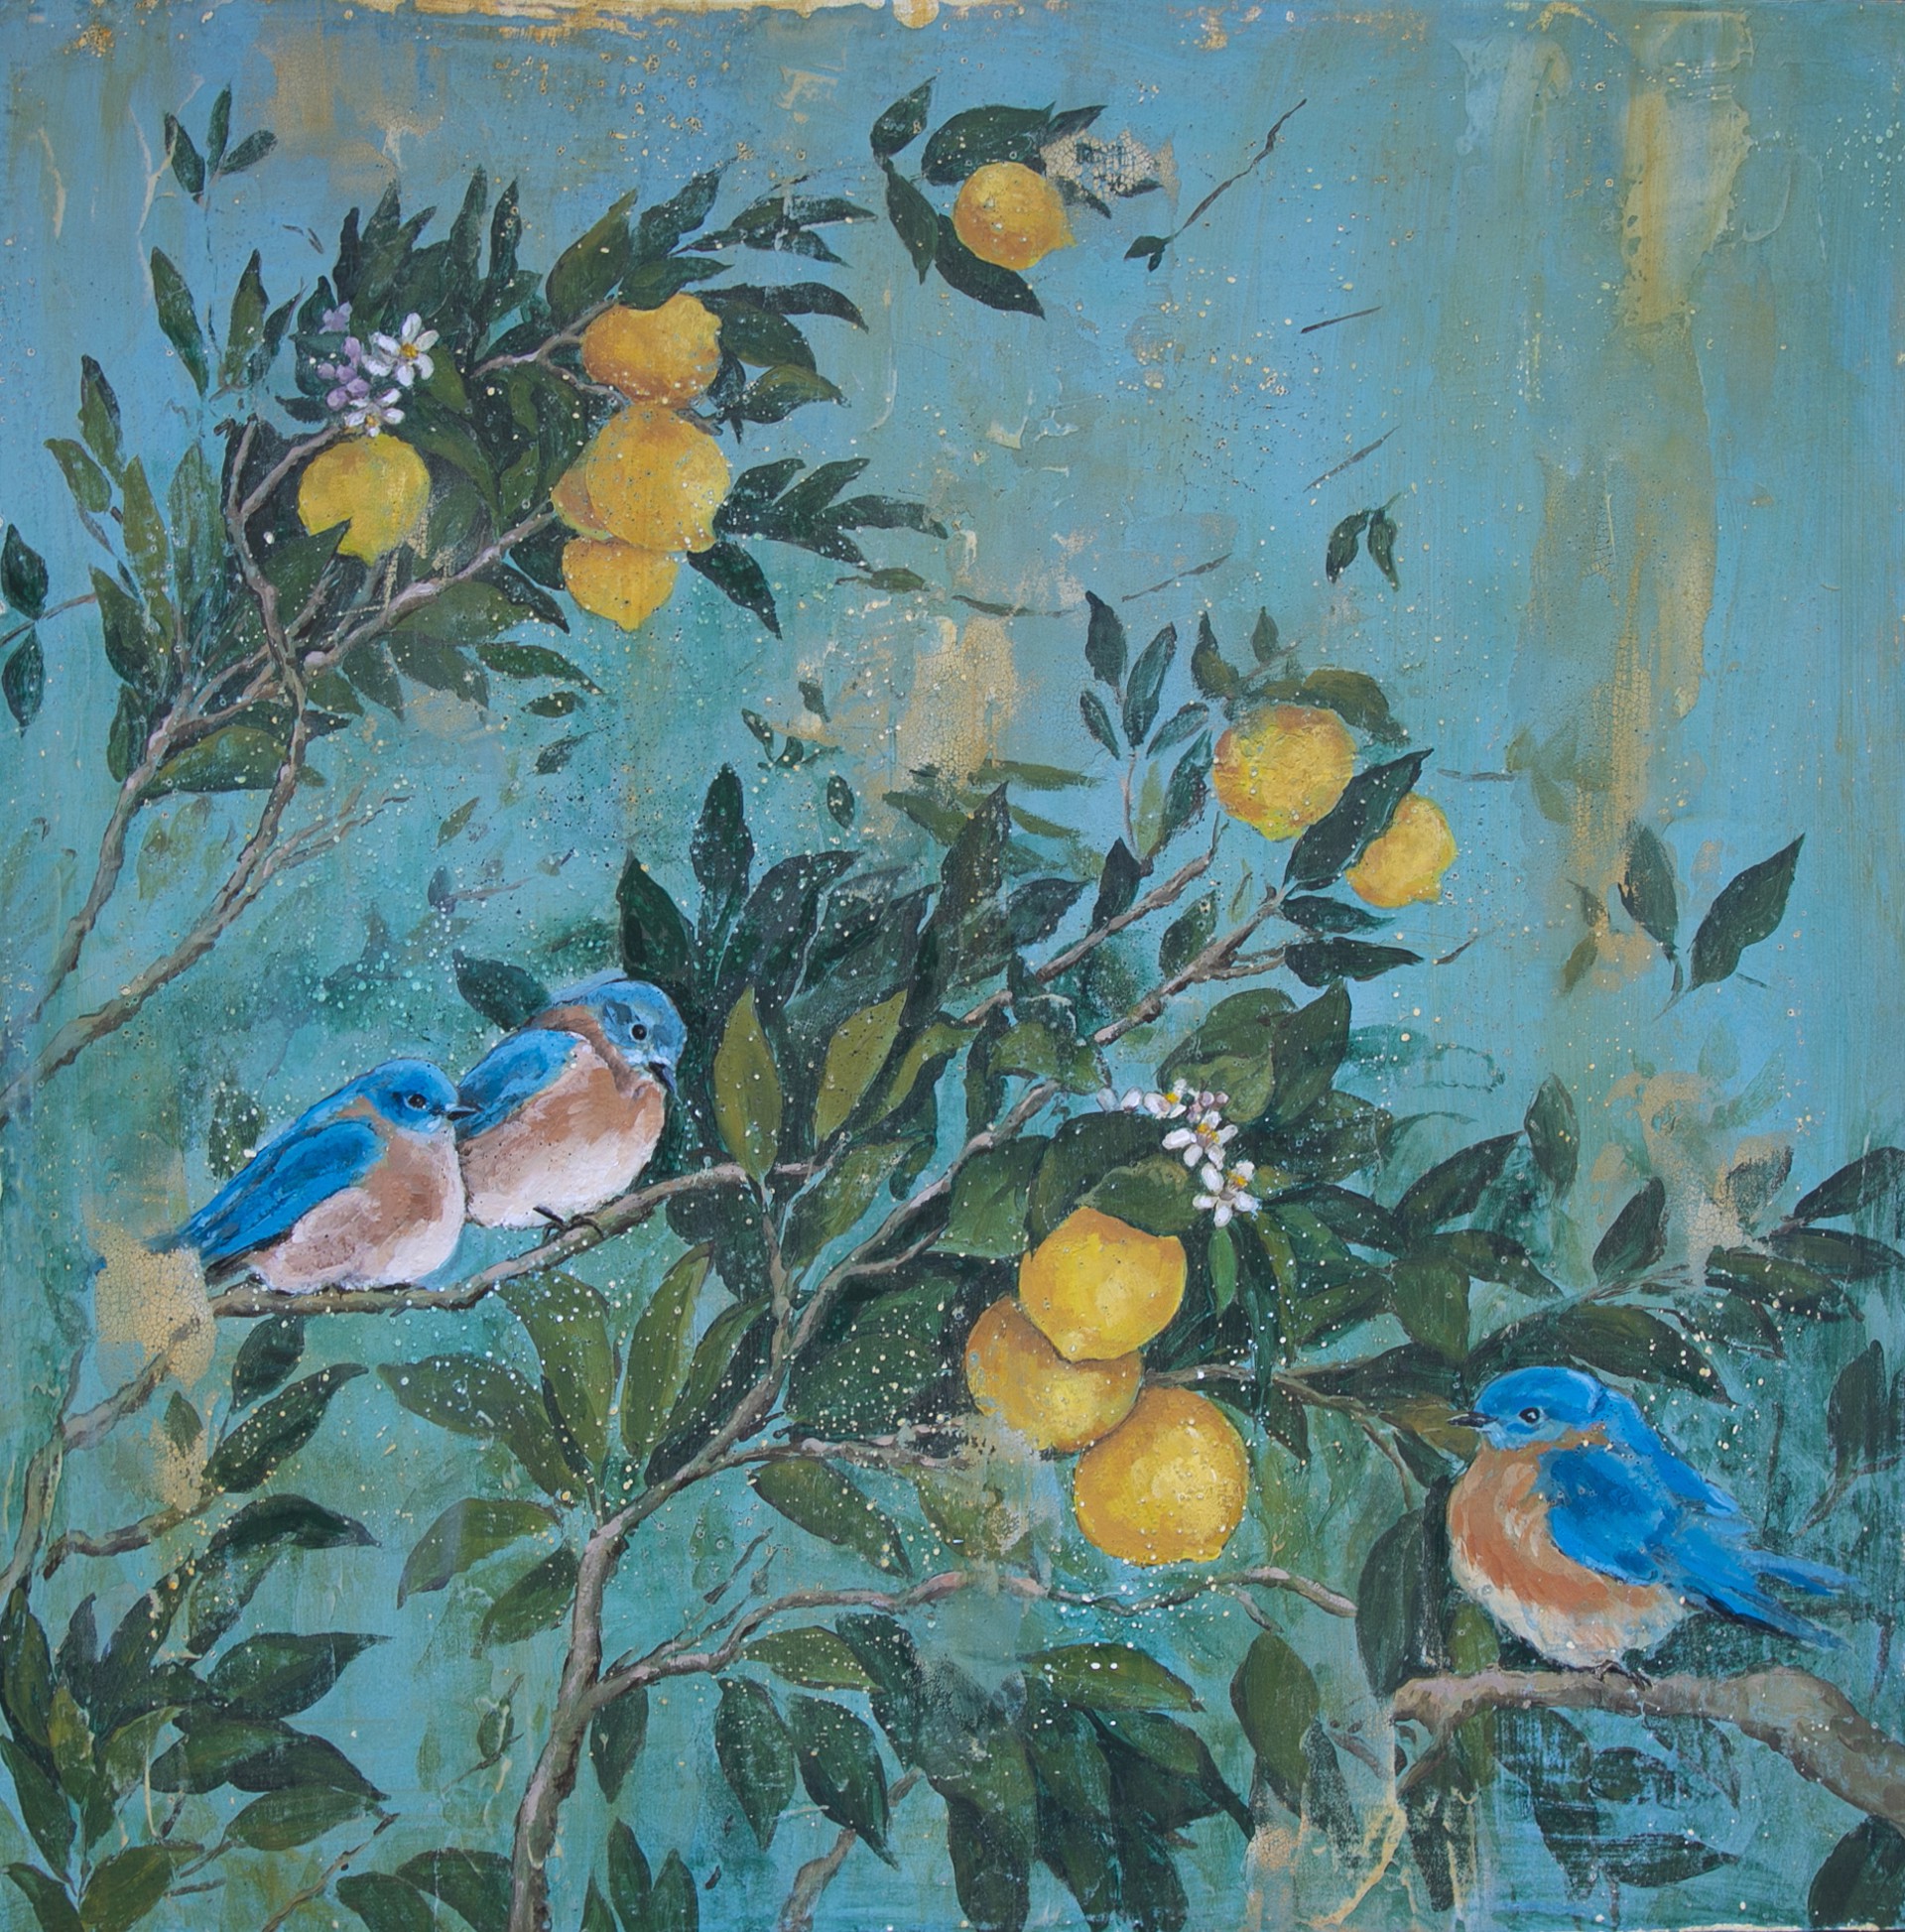 "A little bluebird flew to me, then landed in the lemon tree" by Sarah Mayer